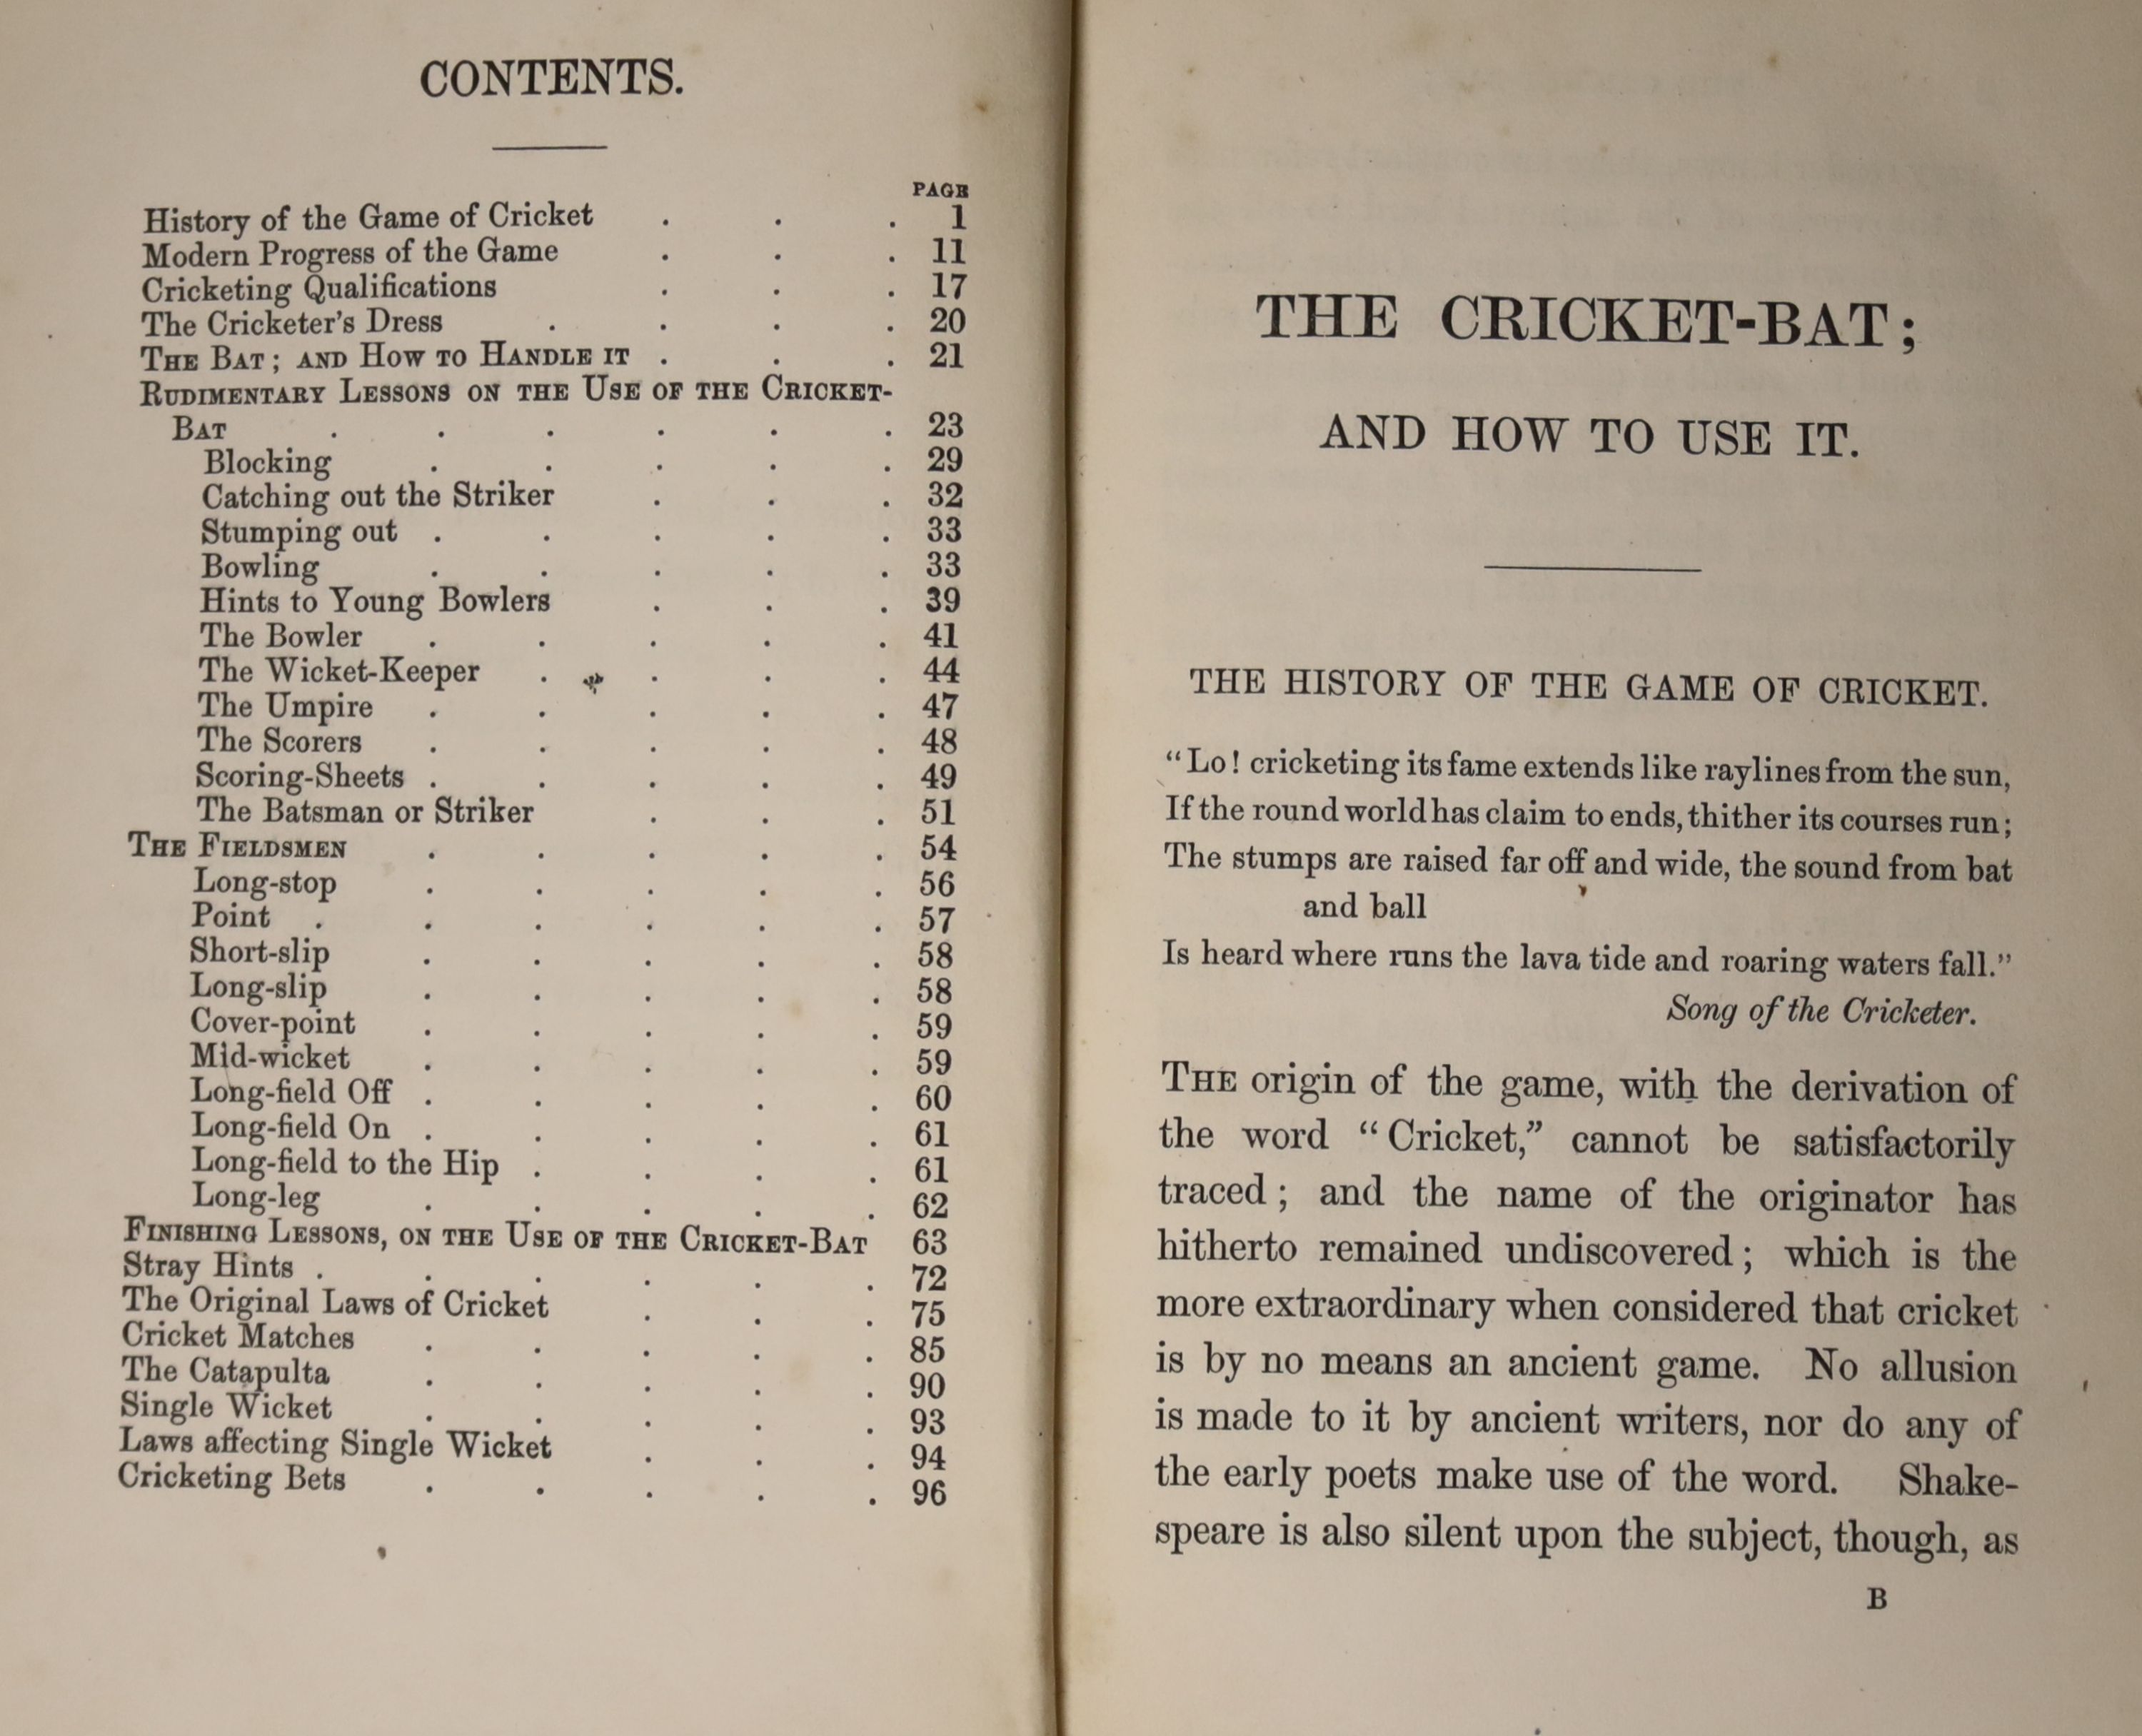 [Wanostrocht, Nicholas] - The Cricket-Bat; and How To Use It; a treatise on the game of cricket ..., by An Old Cricketer, (4), 96pp,